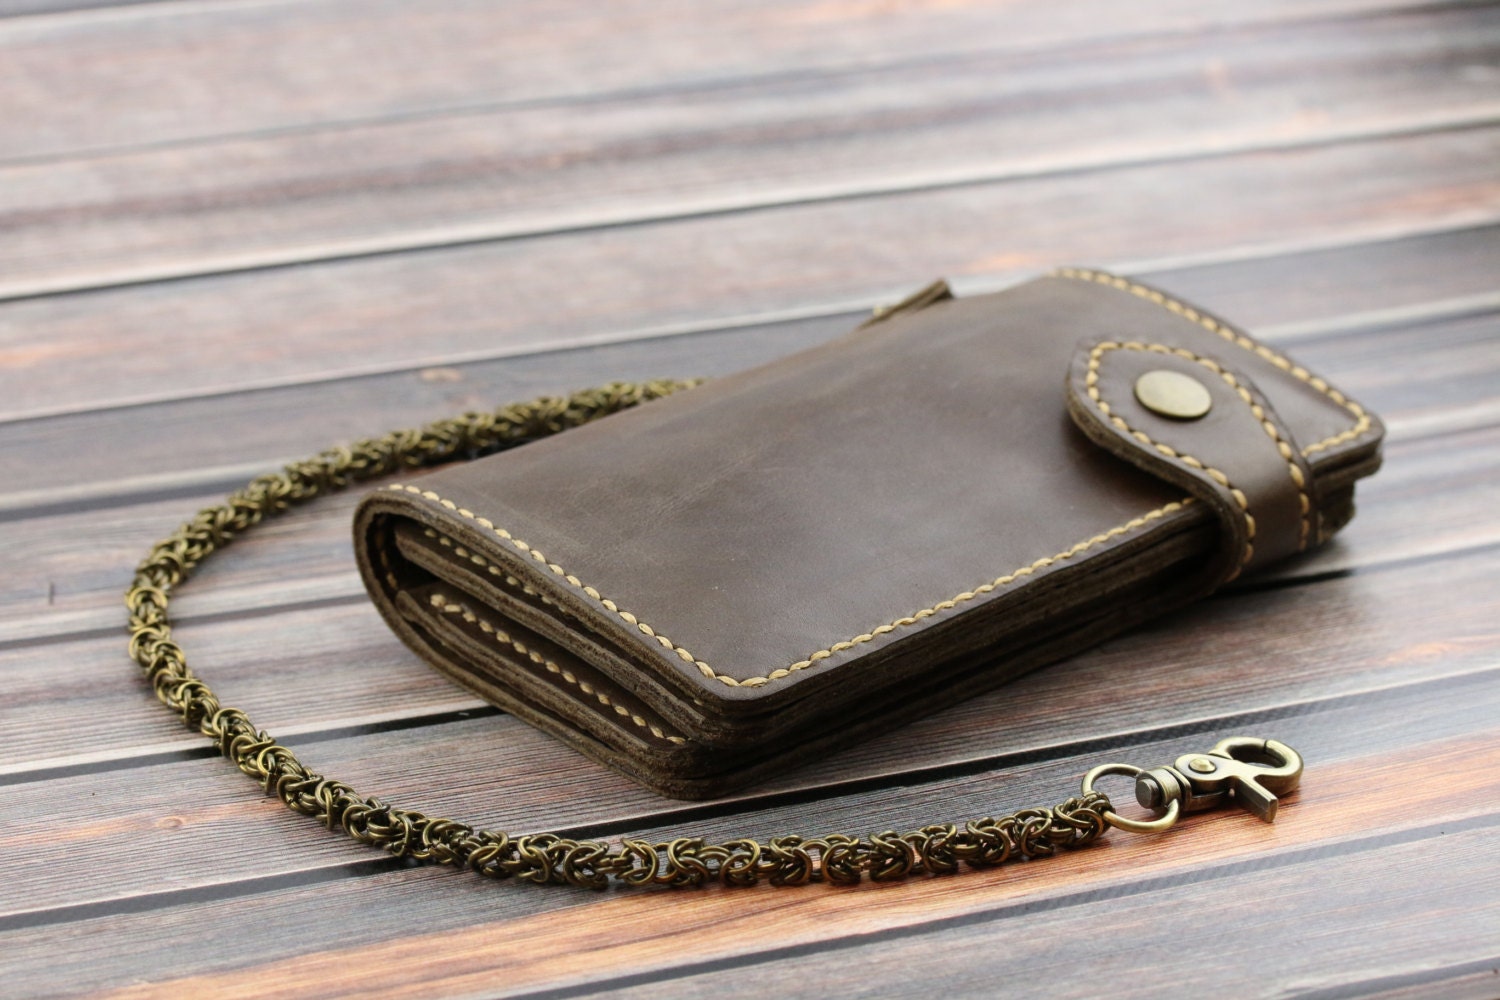 long wallet with chain